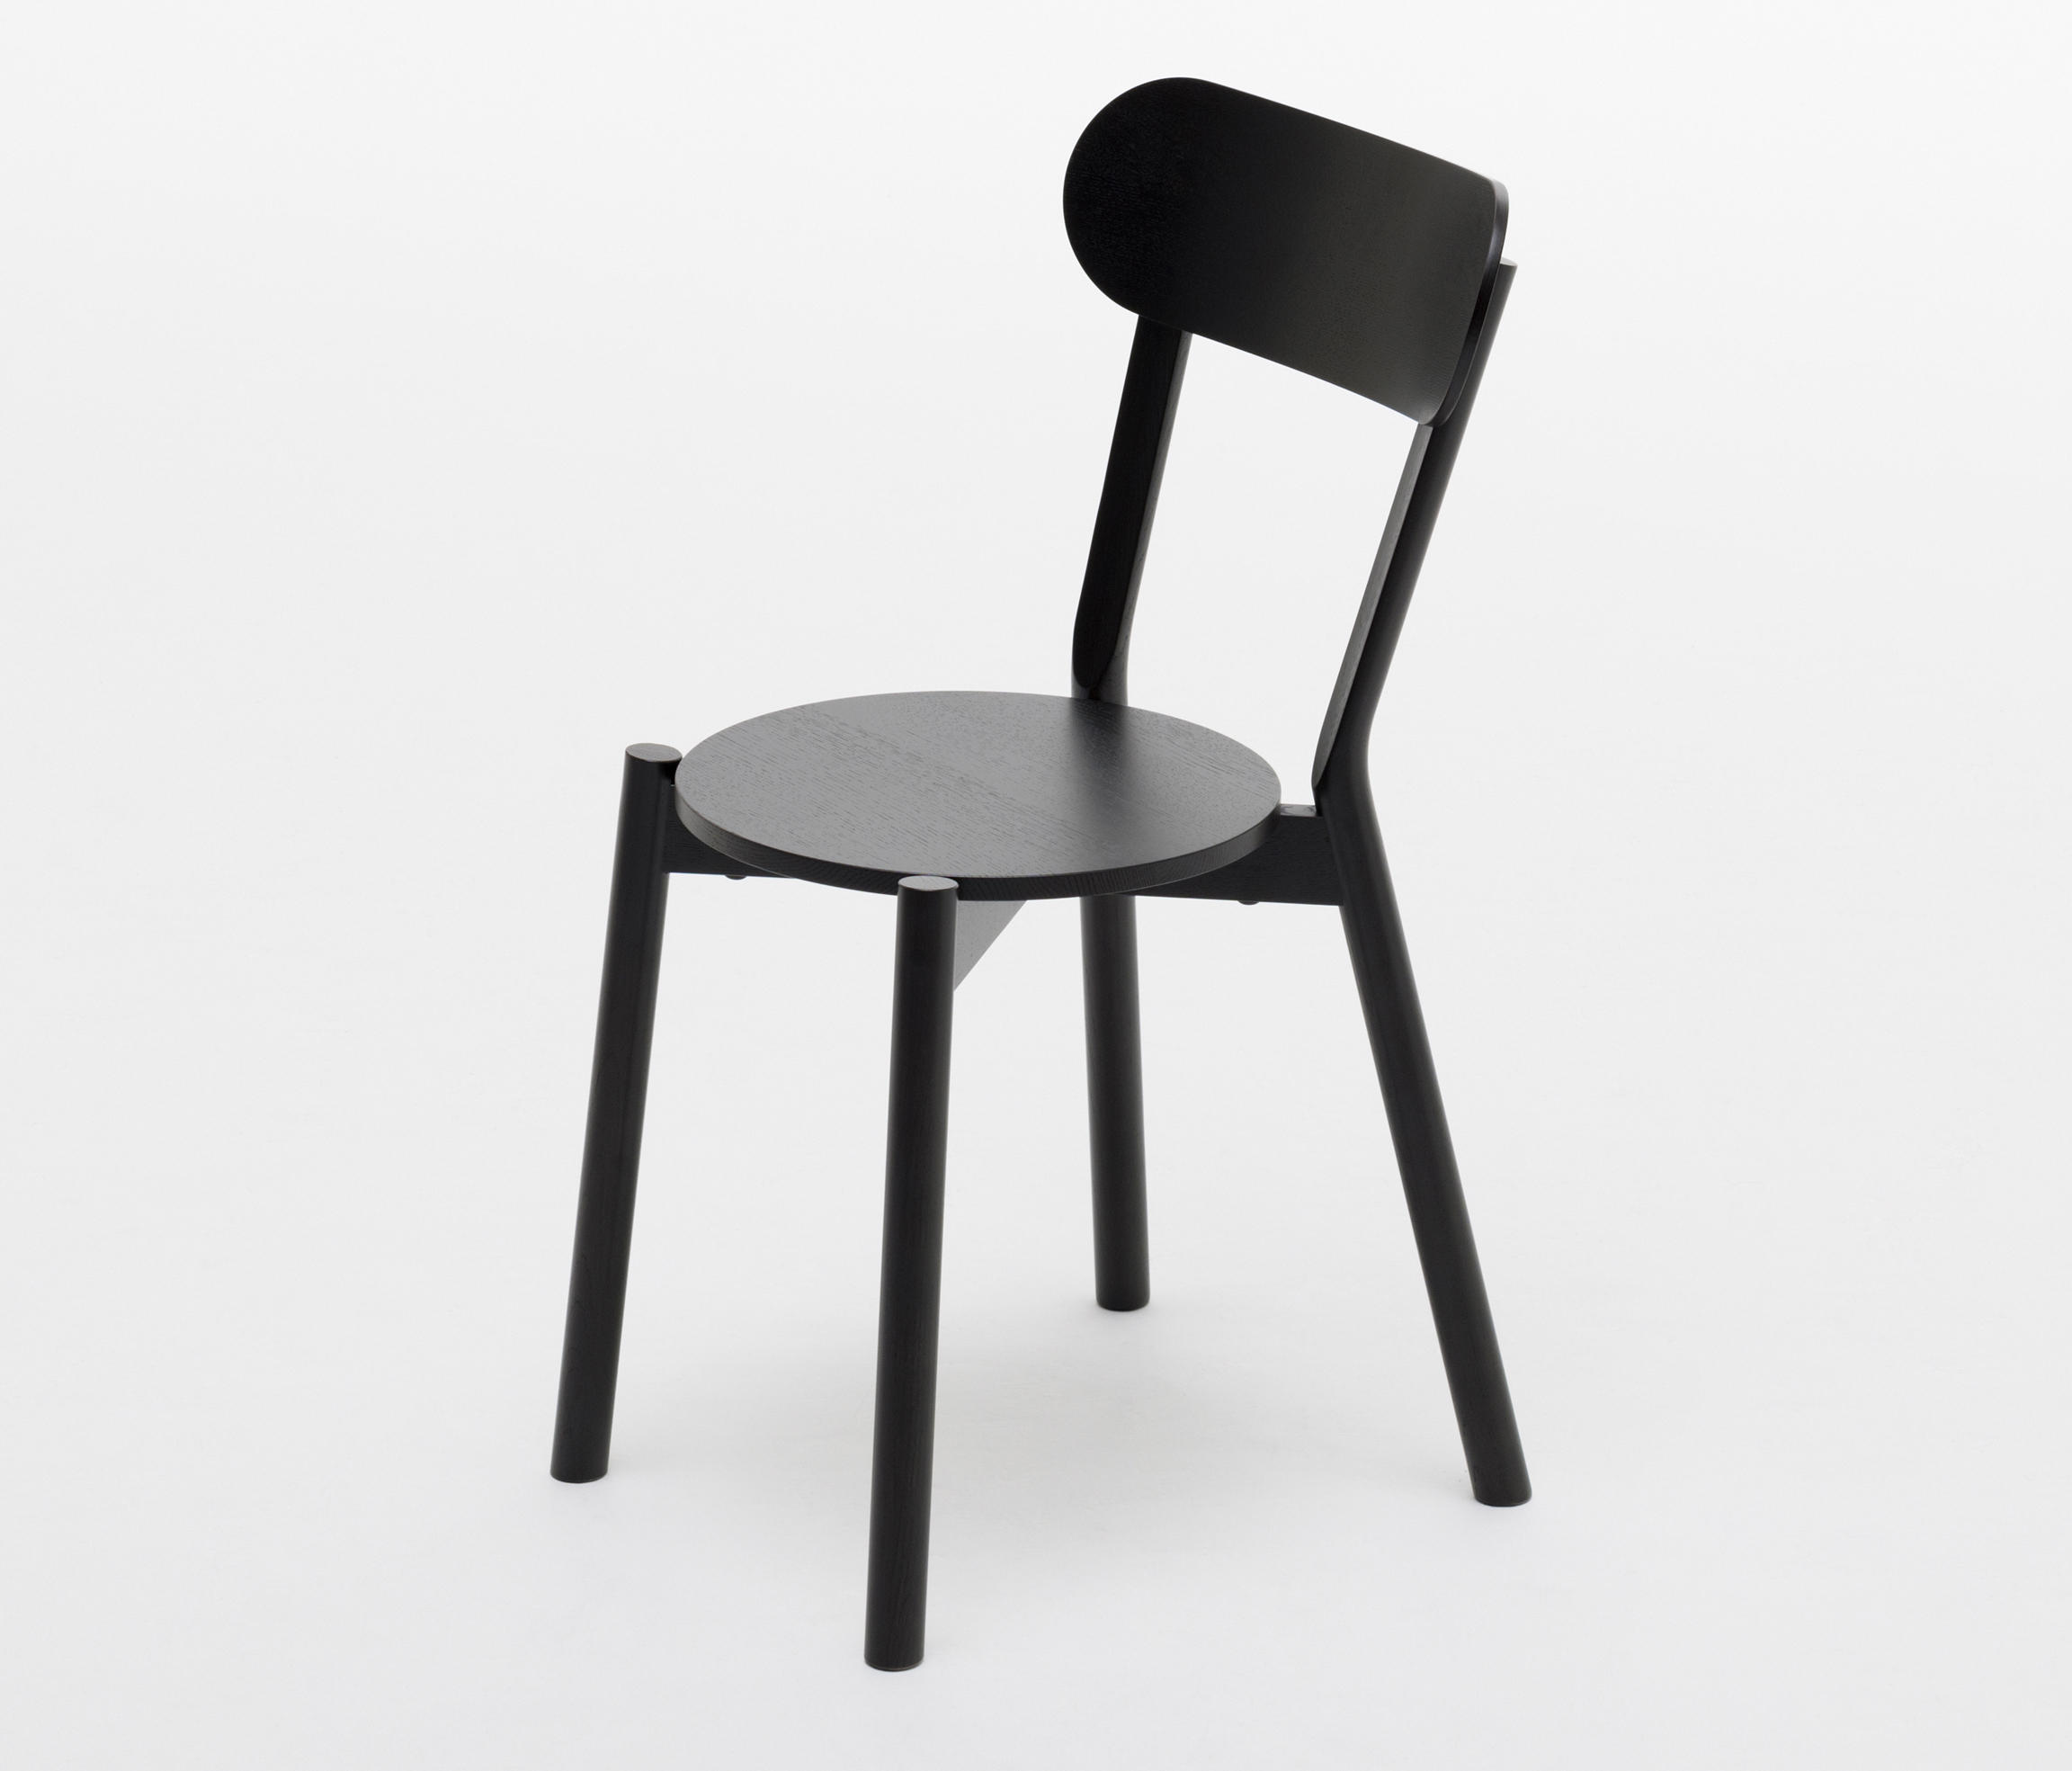 CASTOR CHAIR - Chairs from Karimoku New Standard | Architonic